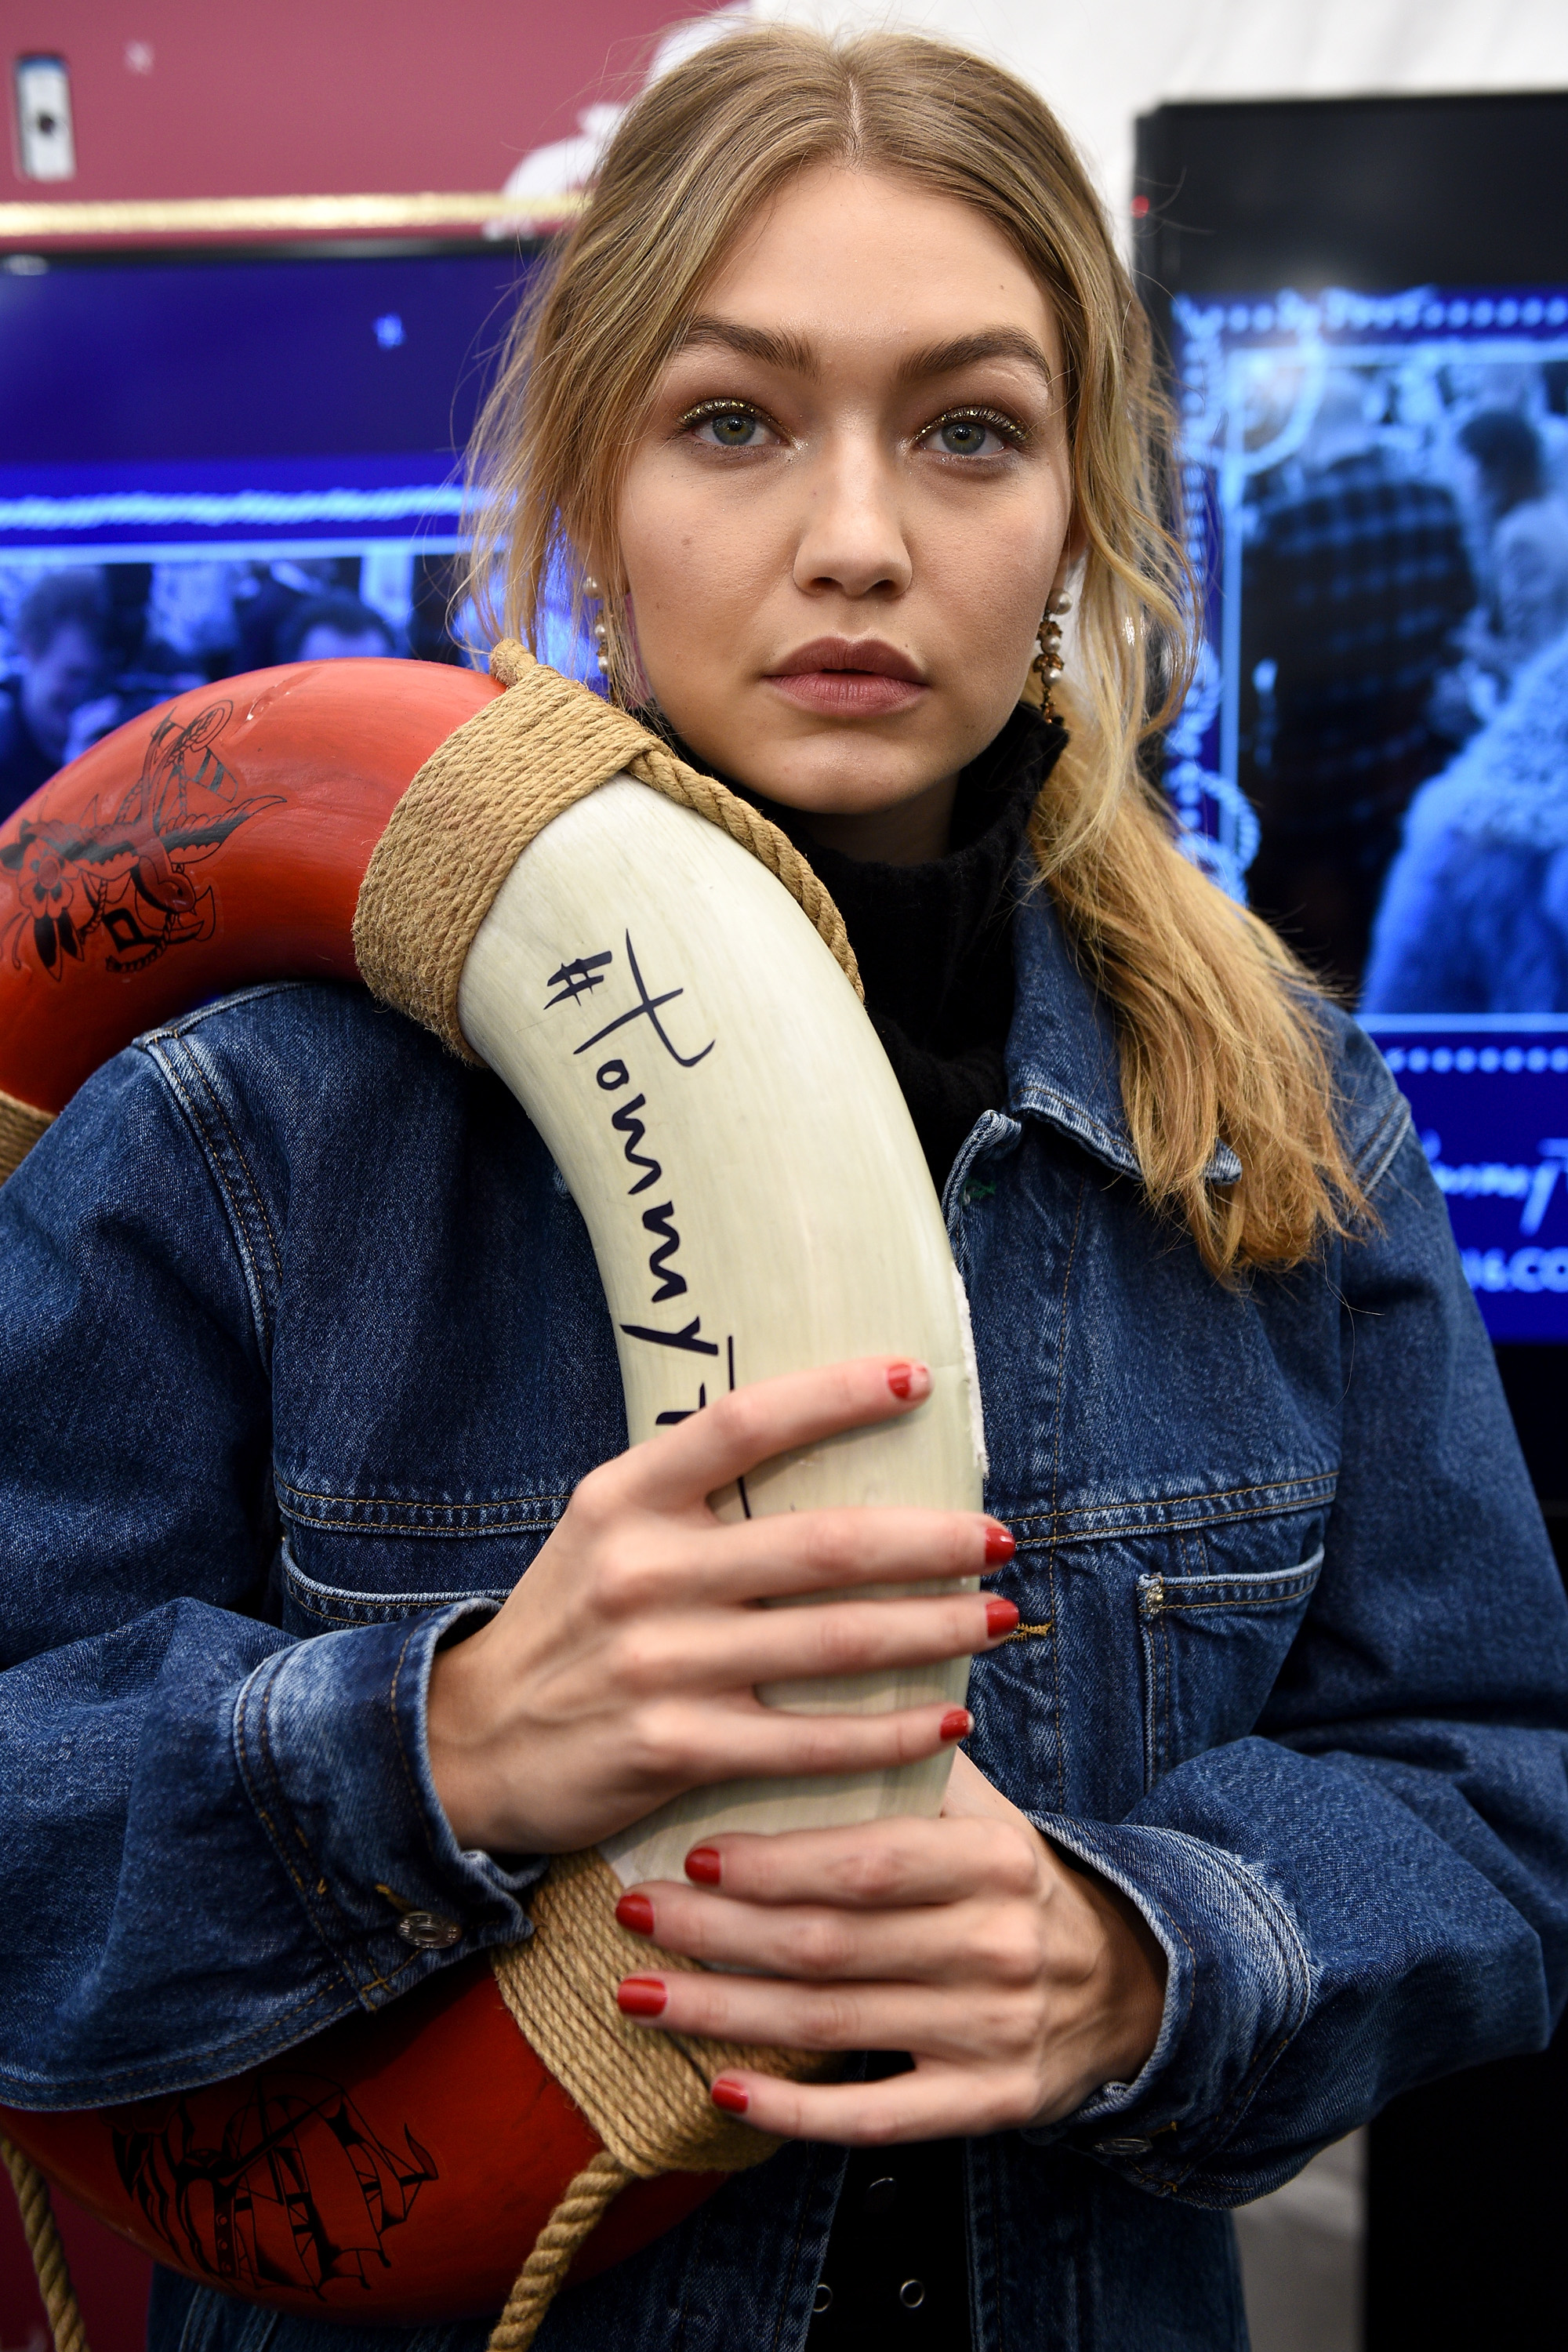 How To Watch The Gigi Hadid X Tommy Hilfiger Show Online You Don't Miss Out